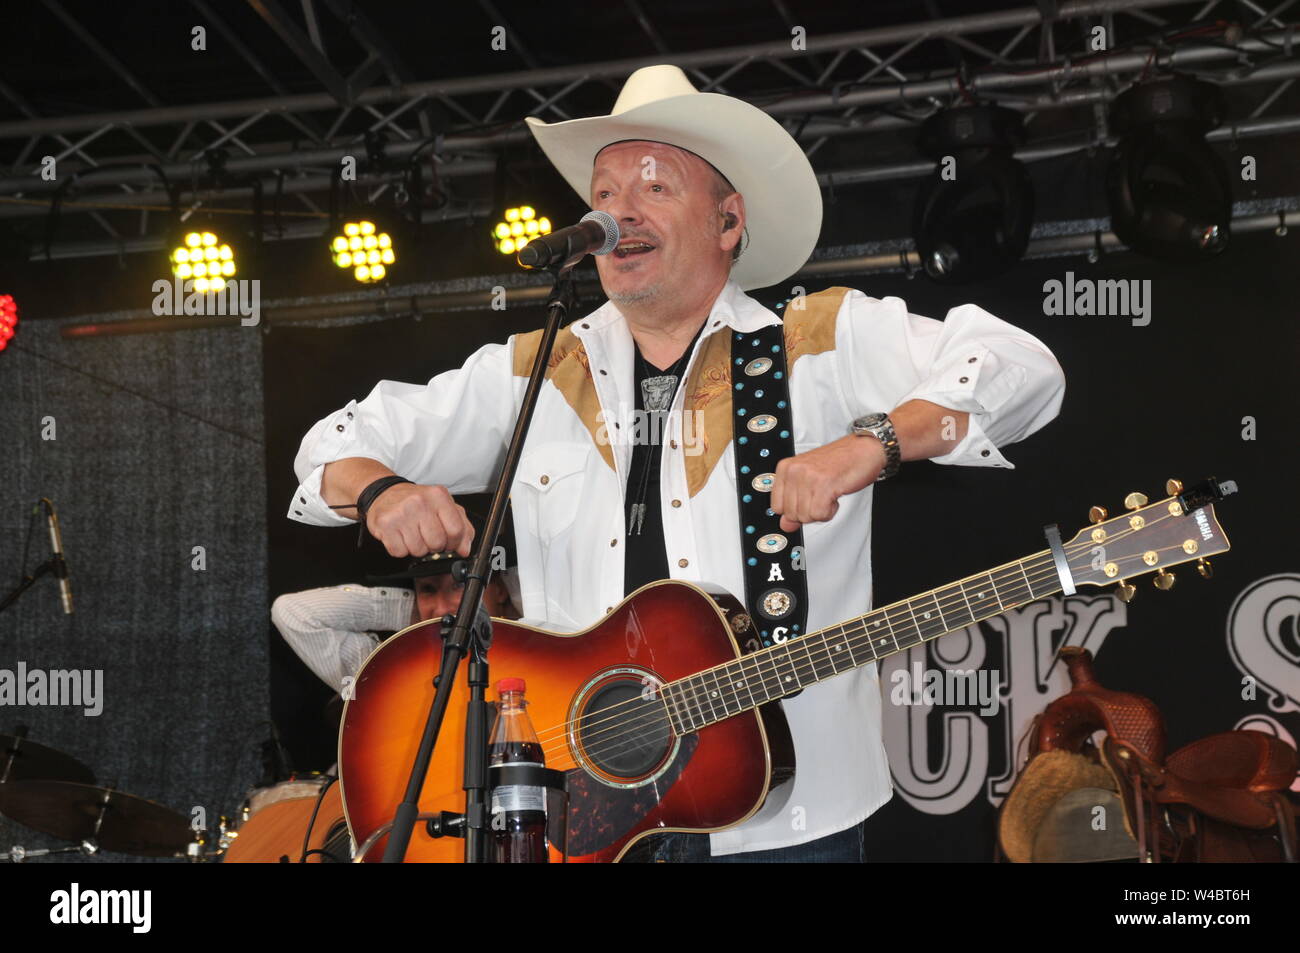 16 July 2019, Schleswig-Holstein, Heiligenhafen: TRUCK STOP - The Country Band from Waterkant on 16 July 2019 in Heiligenhafen at the Heiligenhafener Hafenfesttage (For the 44th time from 11 July to 21 July 2019) open air stage appearance dierkt at the harbour basin. From 20 - 22 o'clock there was Country Rock and songs from the brand new album 'Ein Stückchen Ewigkeit' for over two thousand guests of the event. Schleswig-Holstein, Germany, Europe. Photo: Holger Kasnitz/dpa Stock Photo